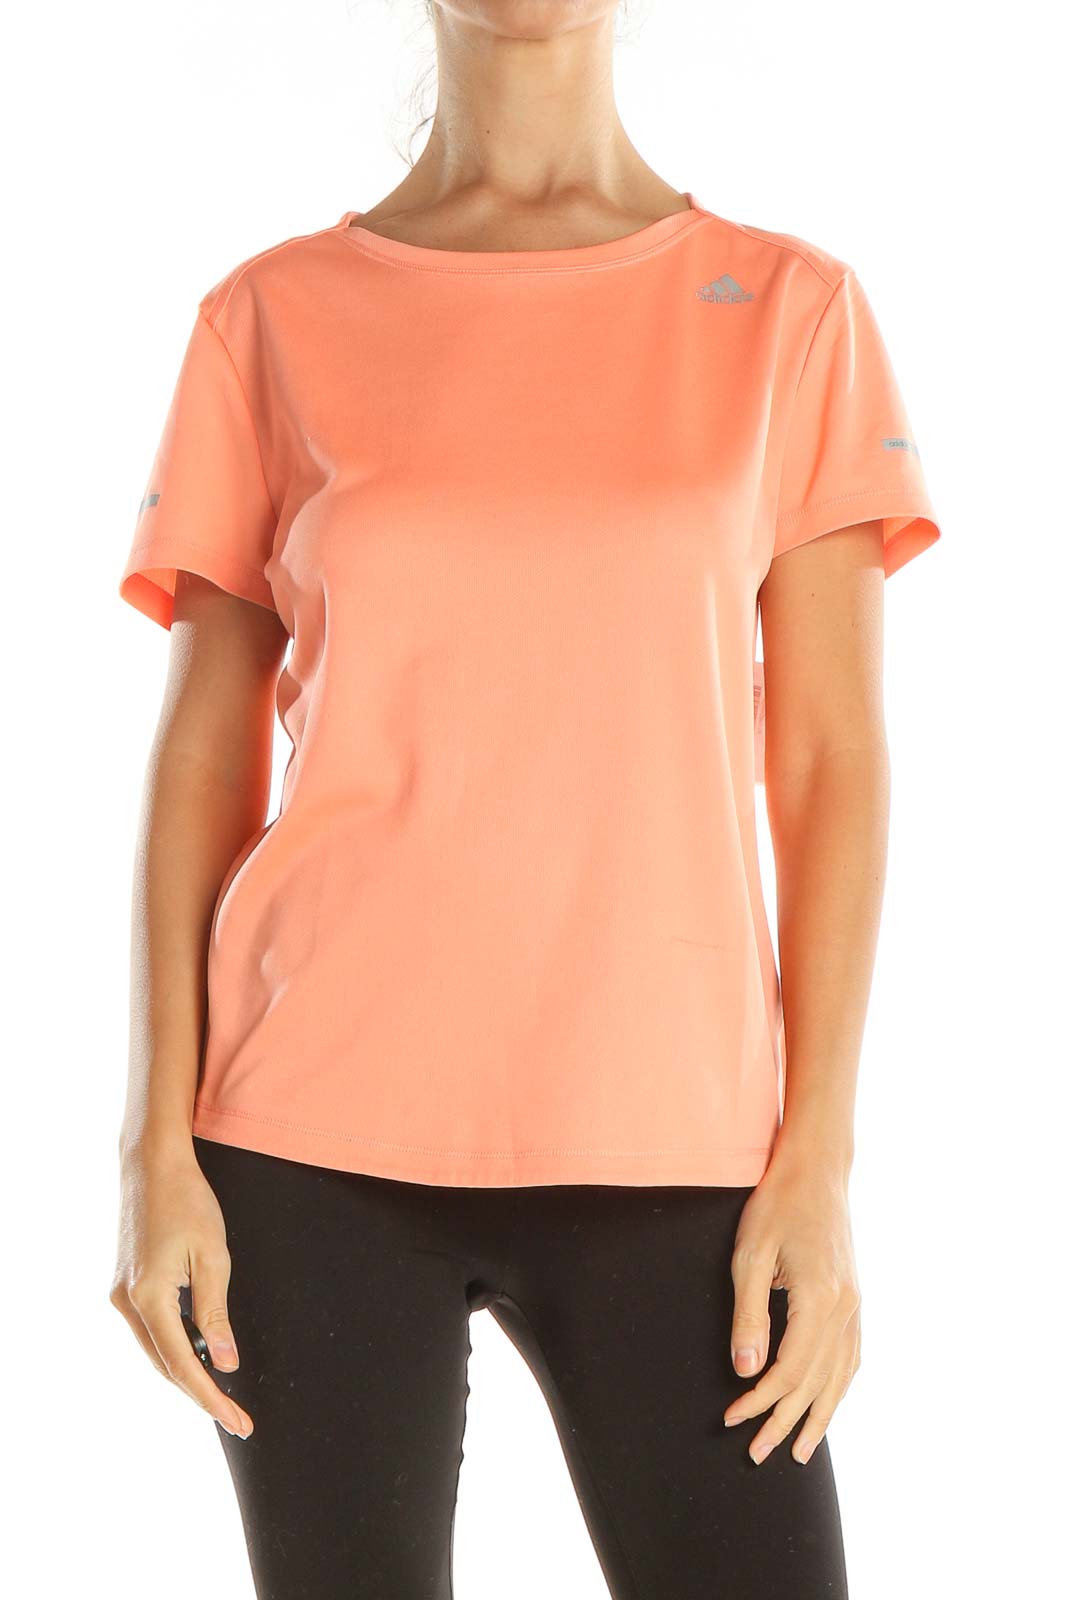 Coral Activewear T-Shirt Front